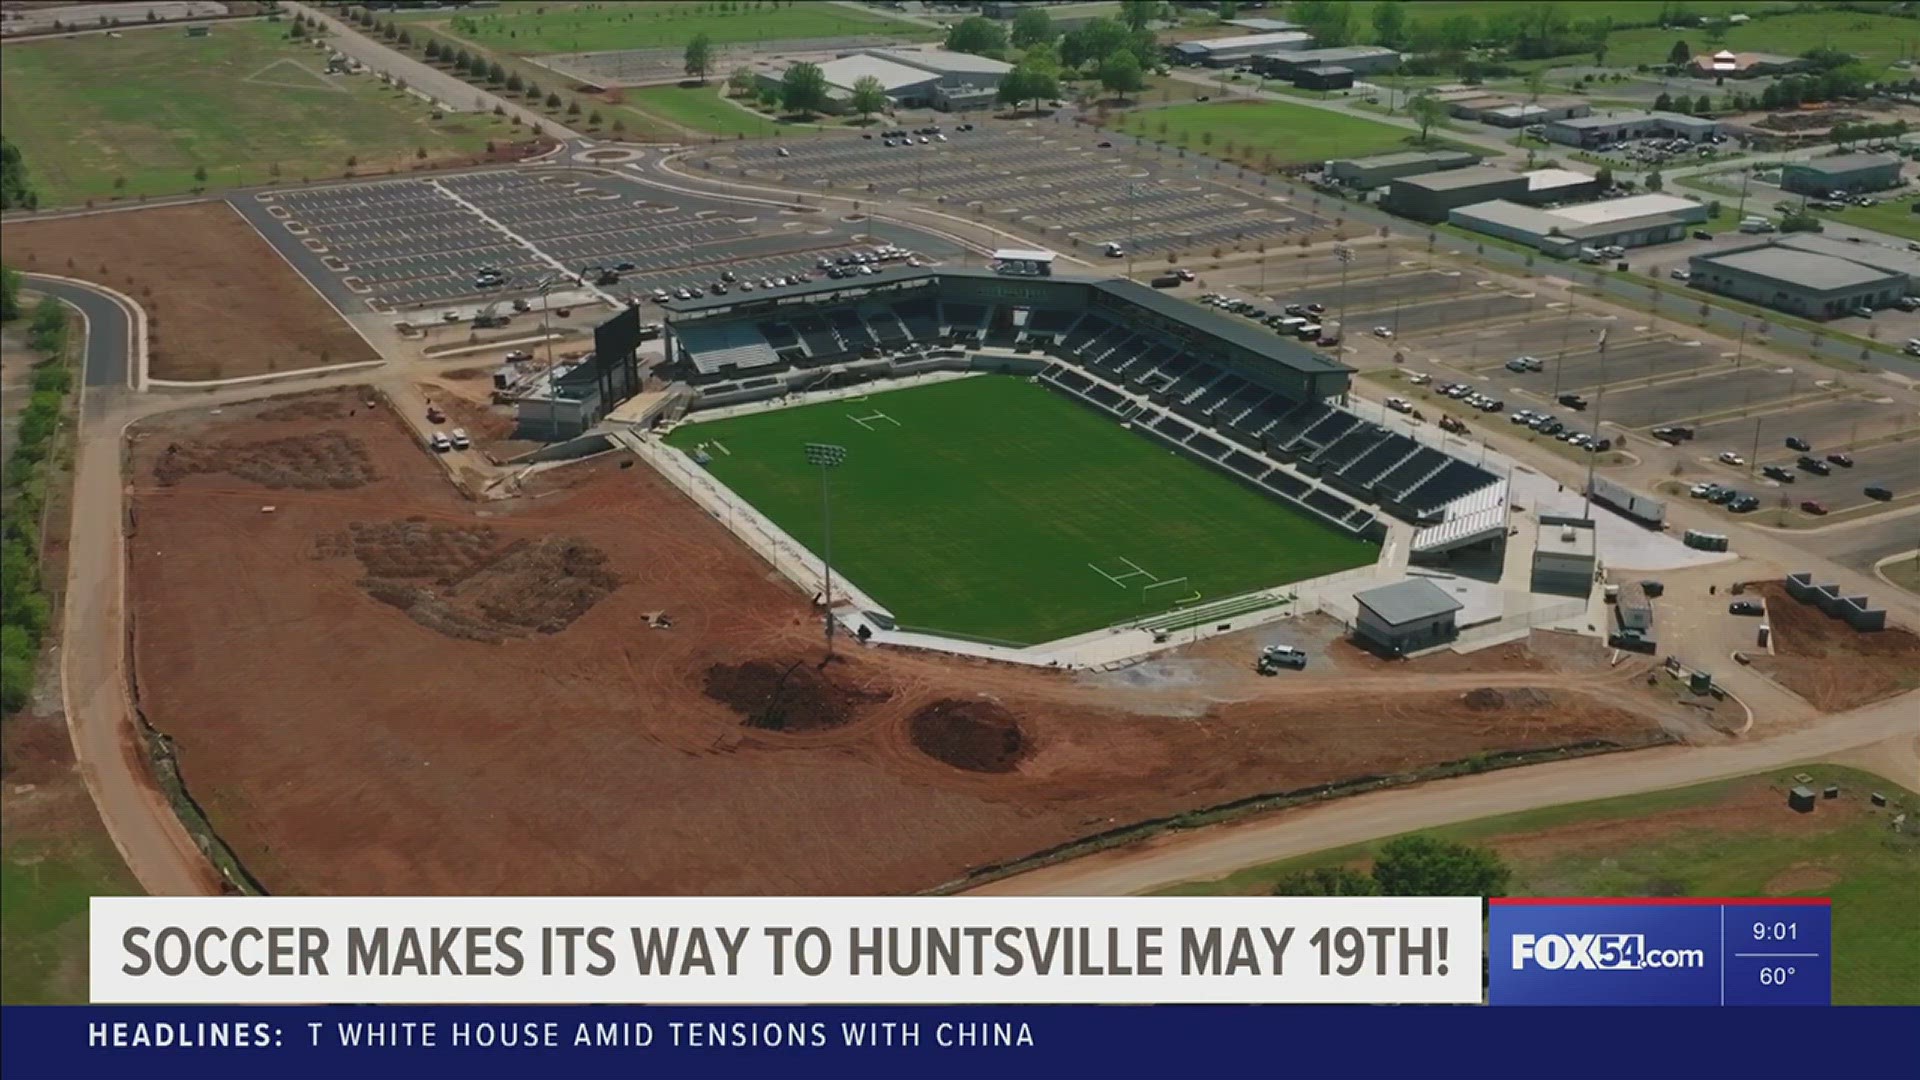 After major renovations, the stadium will open later this month as the new home of the Huntsville City Football Club.